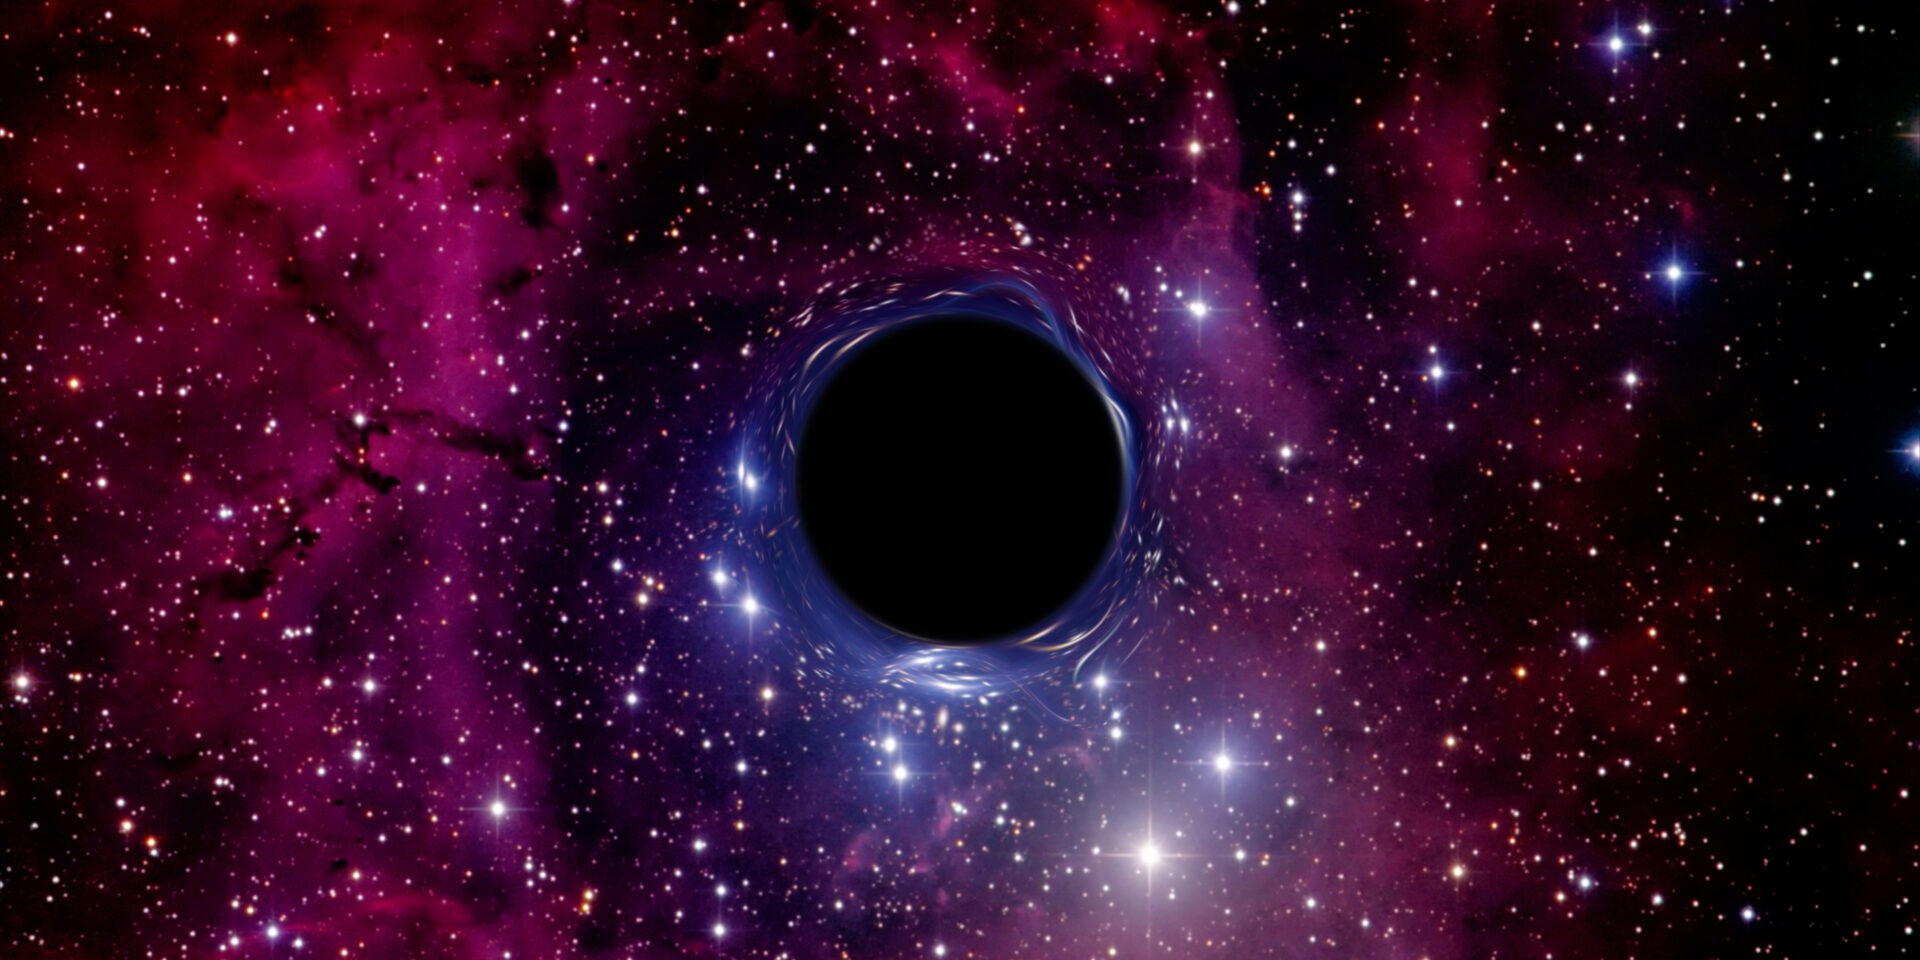 Is time travel through a black hole possible?